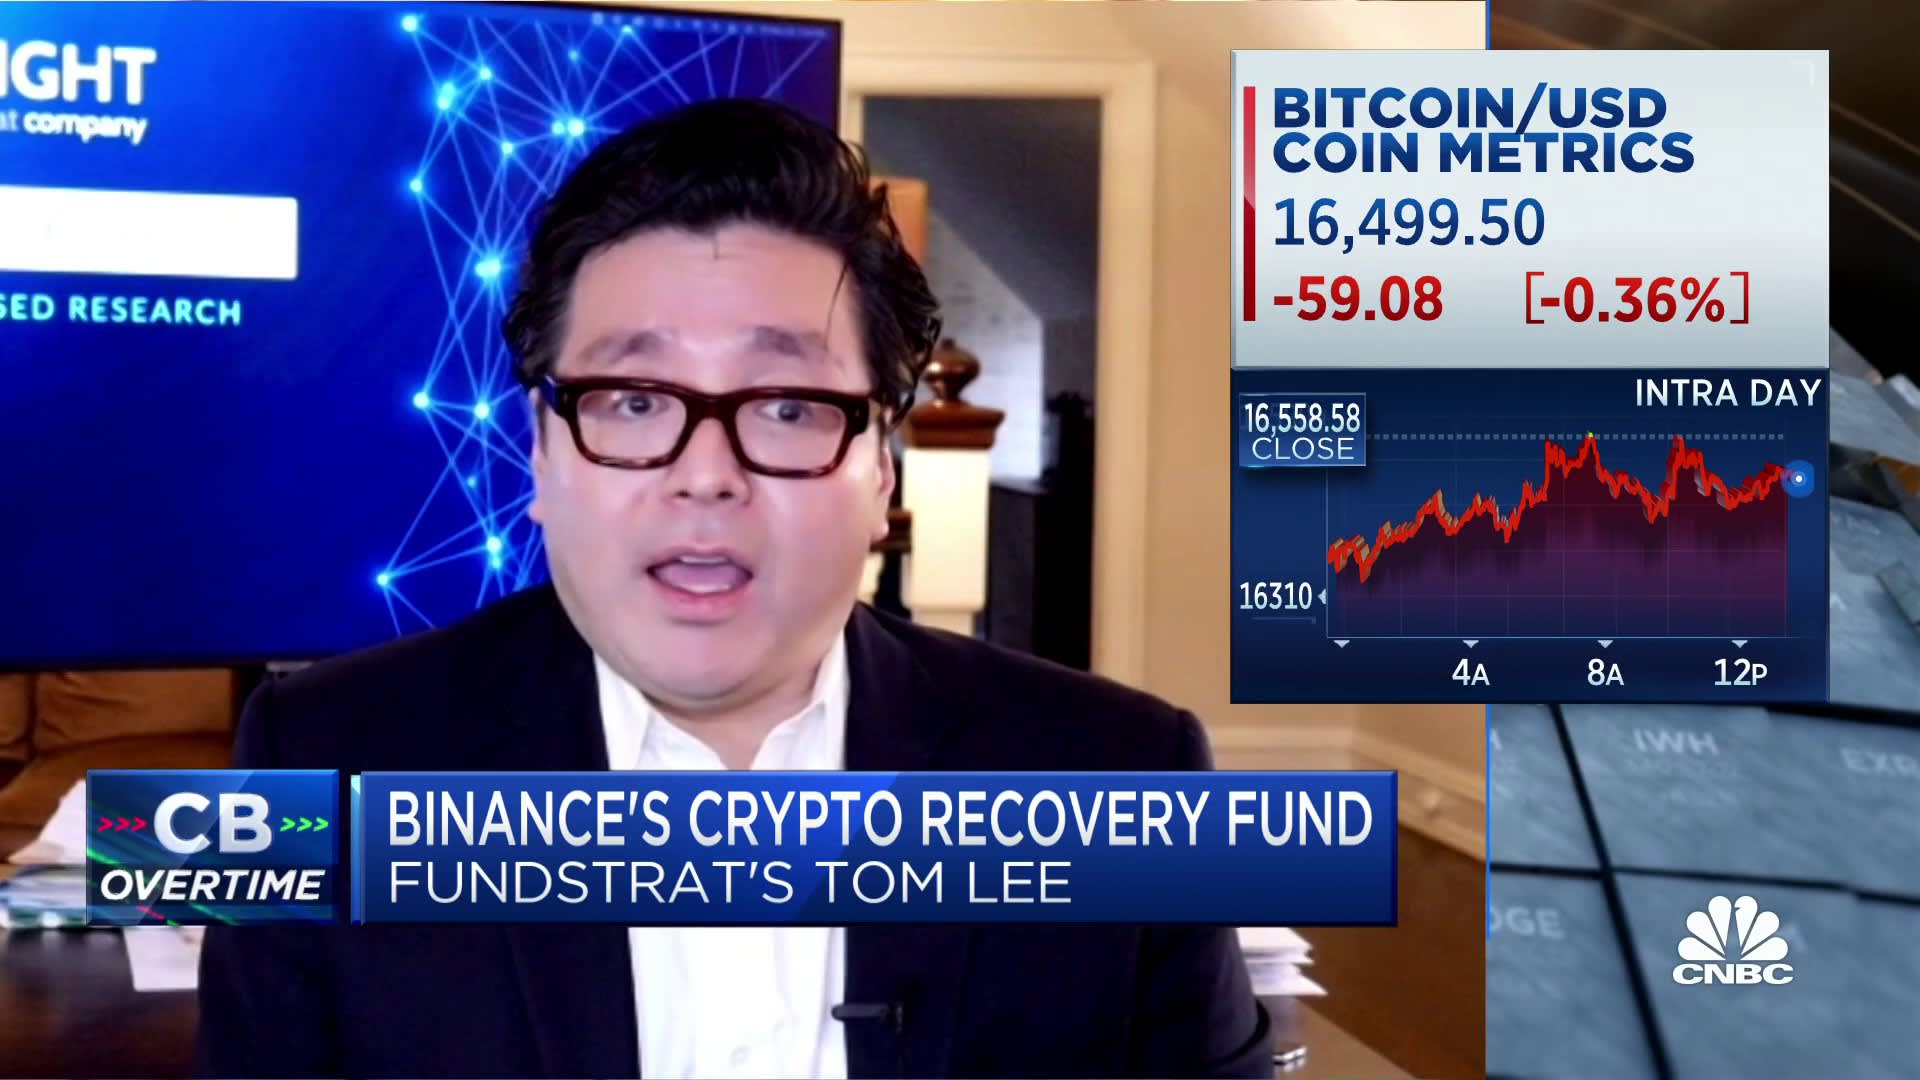 Bitcoin still makes sense for some investors, says Fundstrat's Tom Lee – CNBC